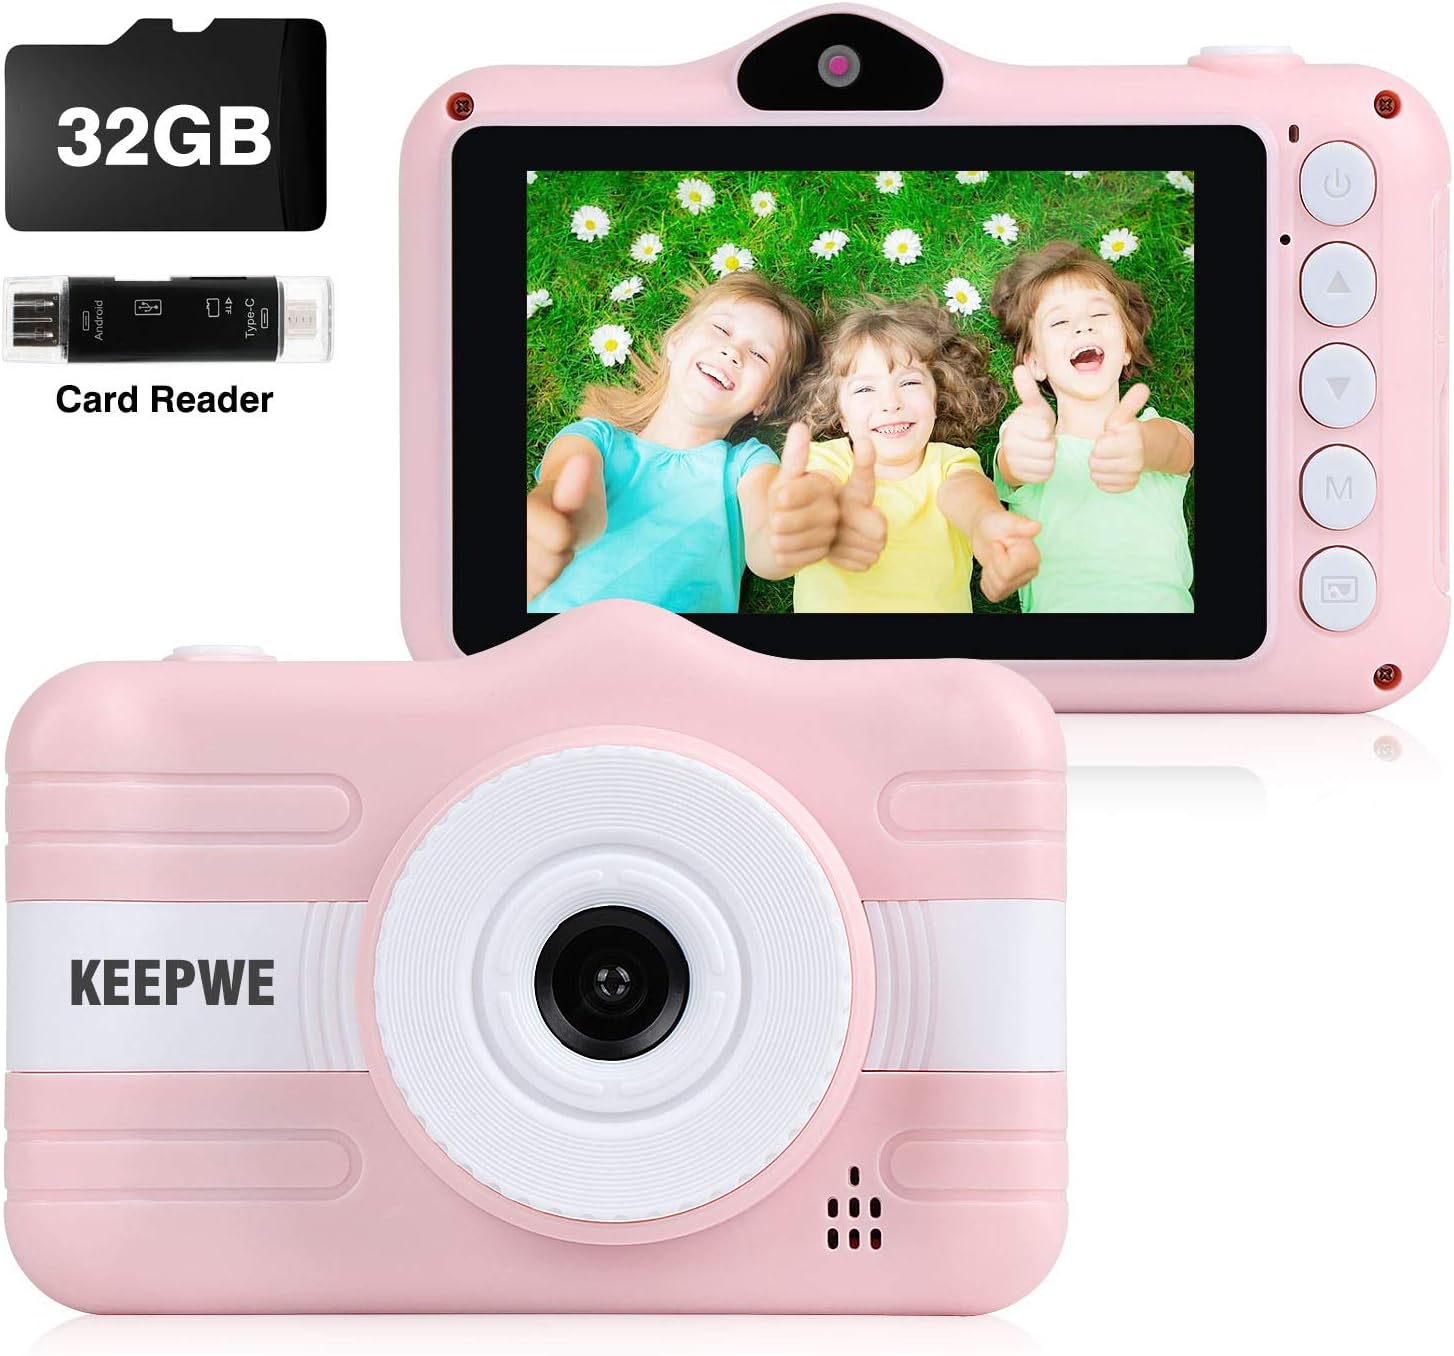  Kids Camera Digital Camera For Kids Gifts Camera For, big gift ideas for 10 year old boy